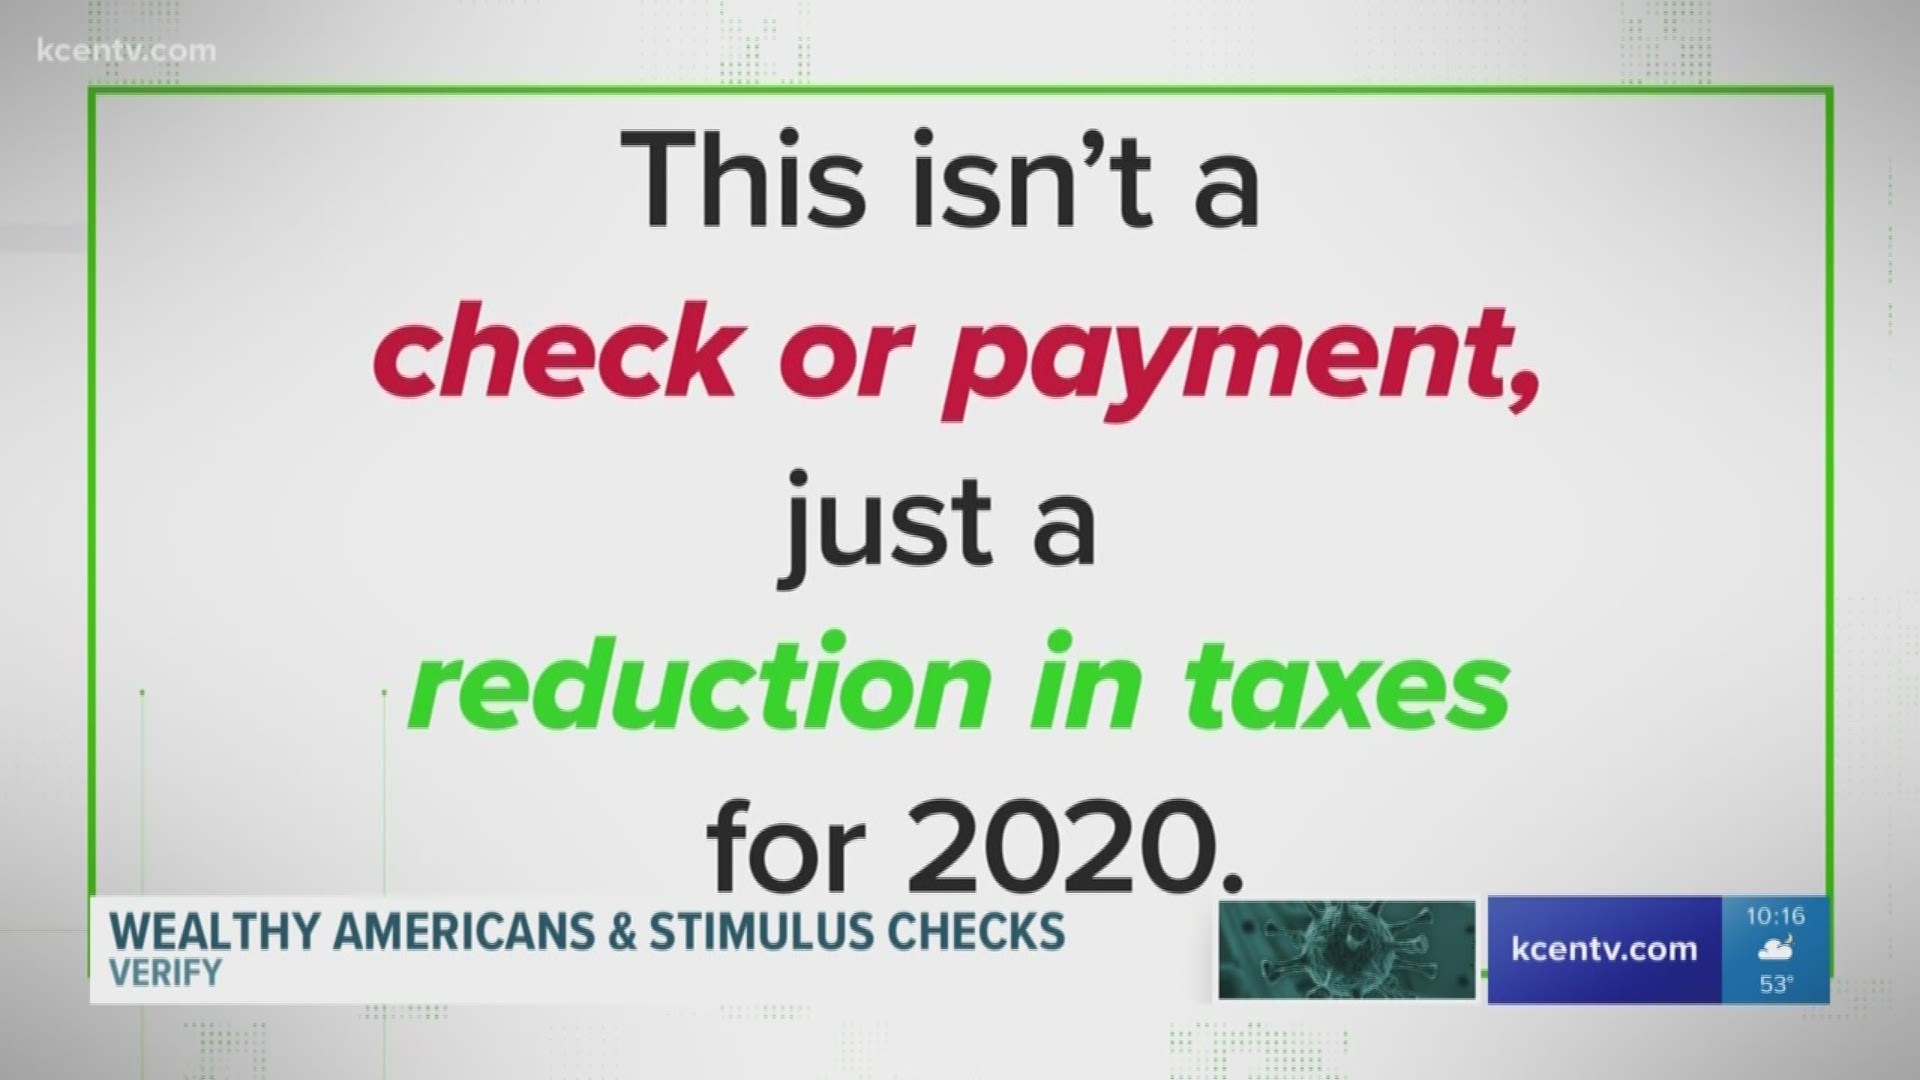 Plenty of posts on social media claim that wealthy Americans are getting millions in stimulus money. But is that correct? Our Verify team looks into the claims.